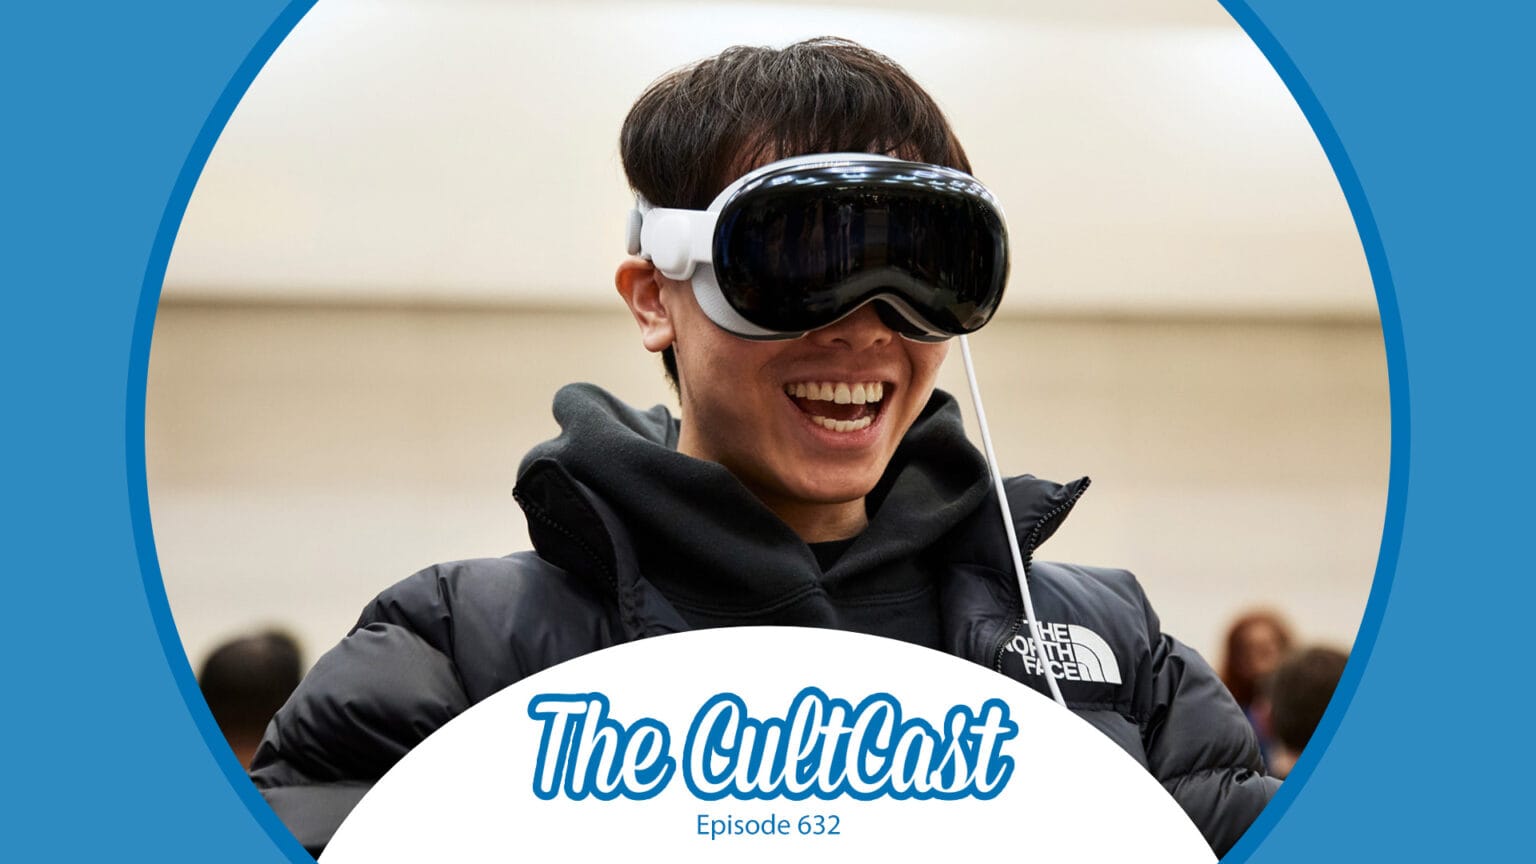 Apple Vision Pro reviews on The CultCast episode 632. In the image, a man wears one of the new headsets.